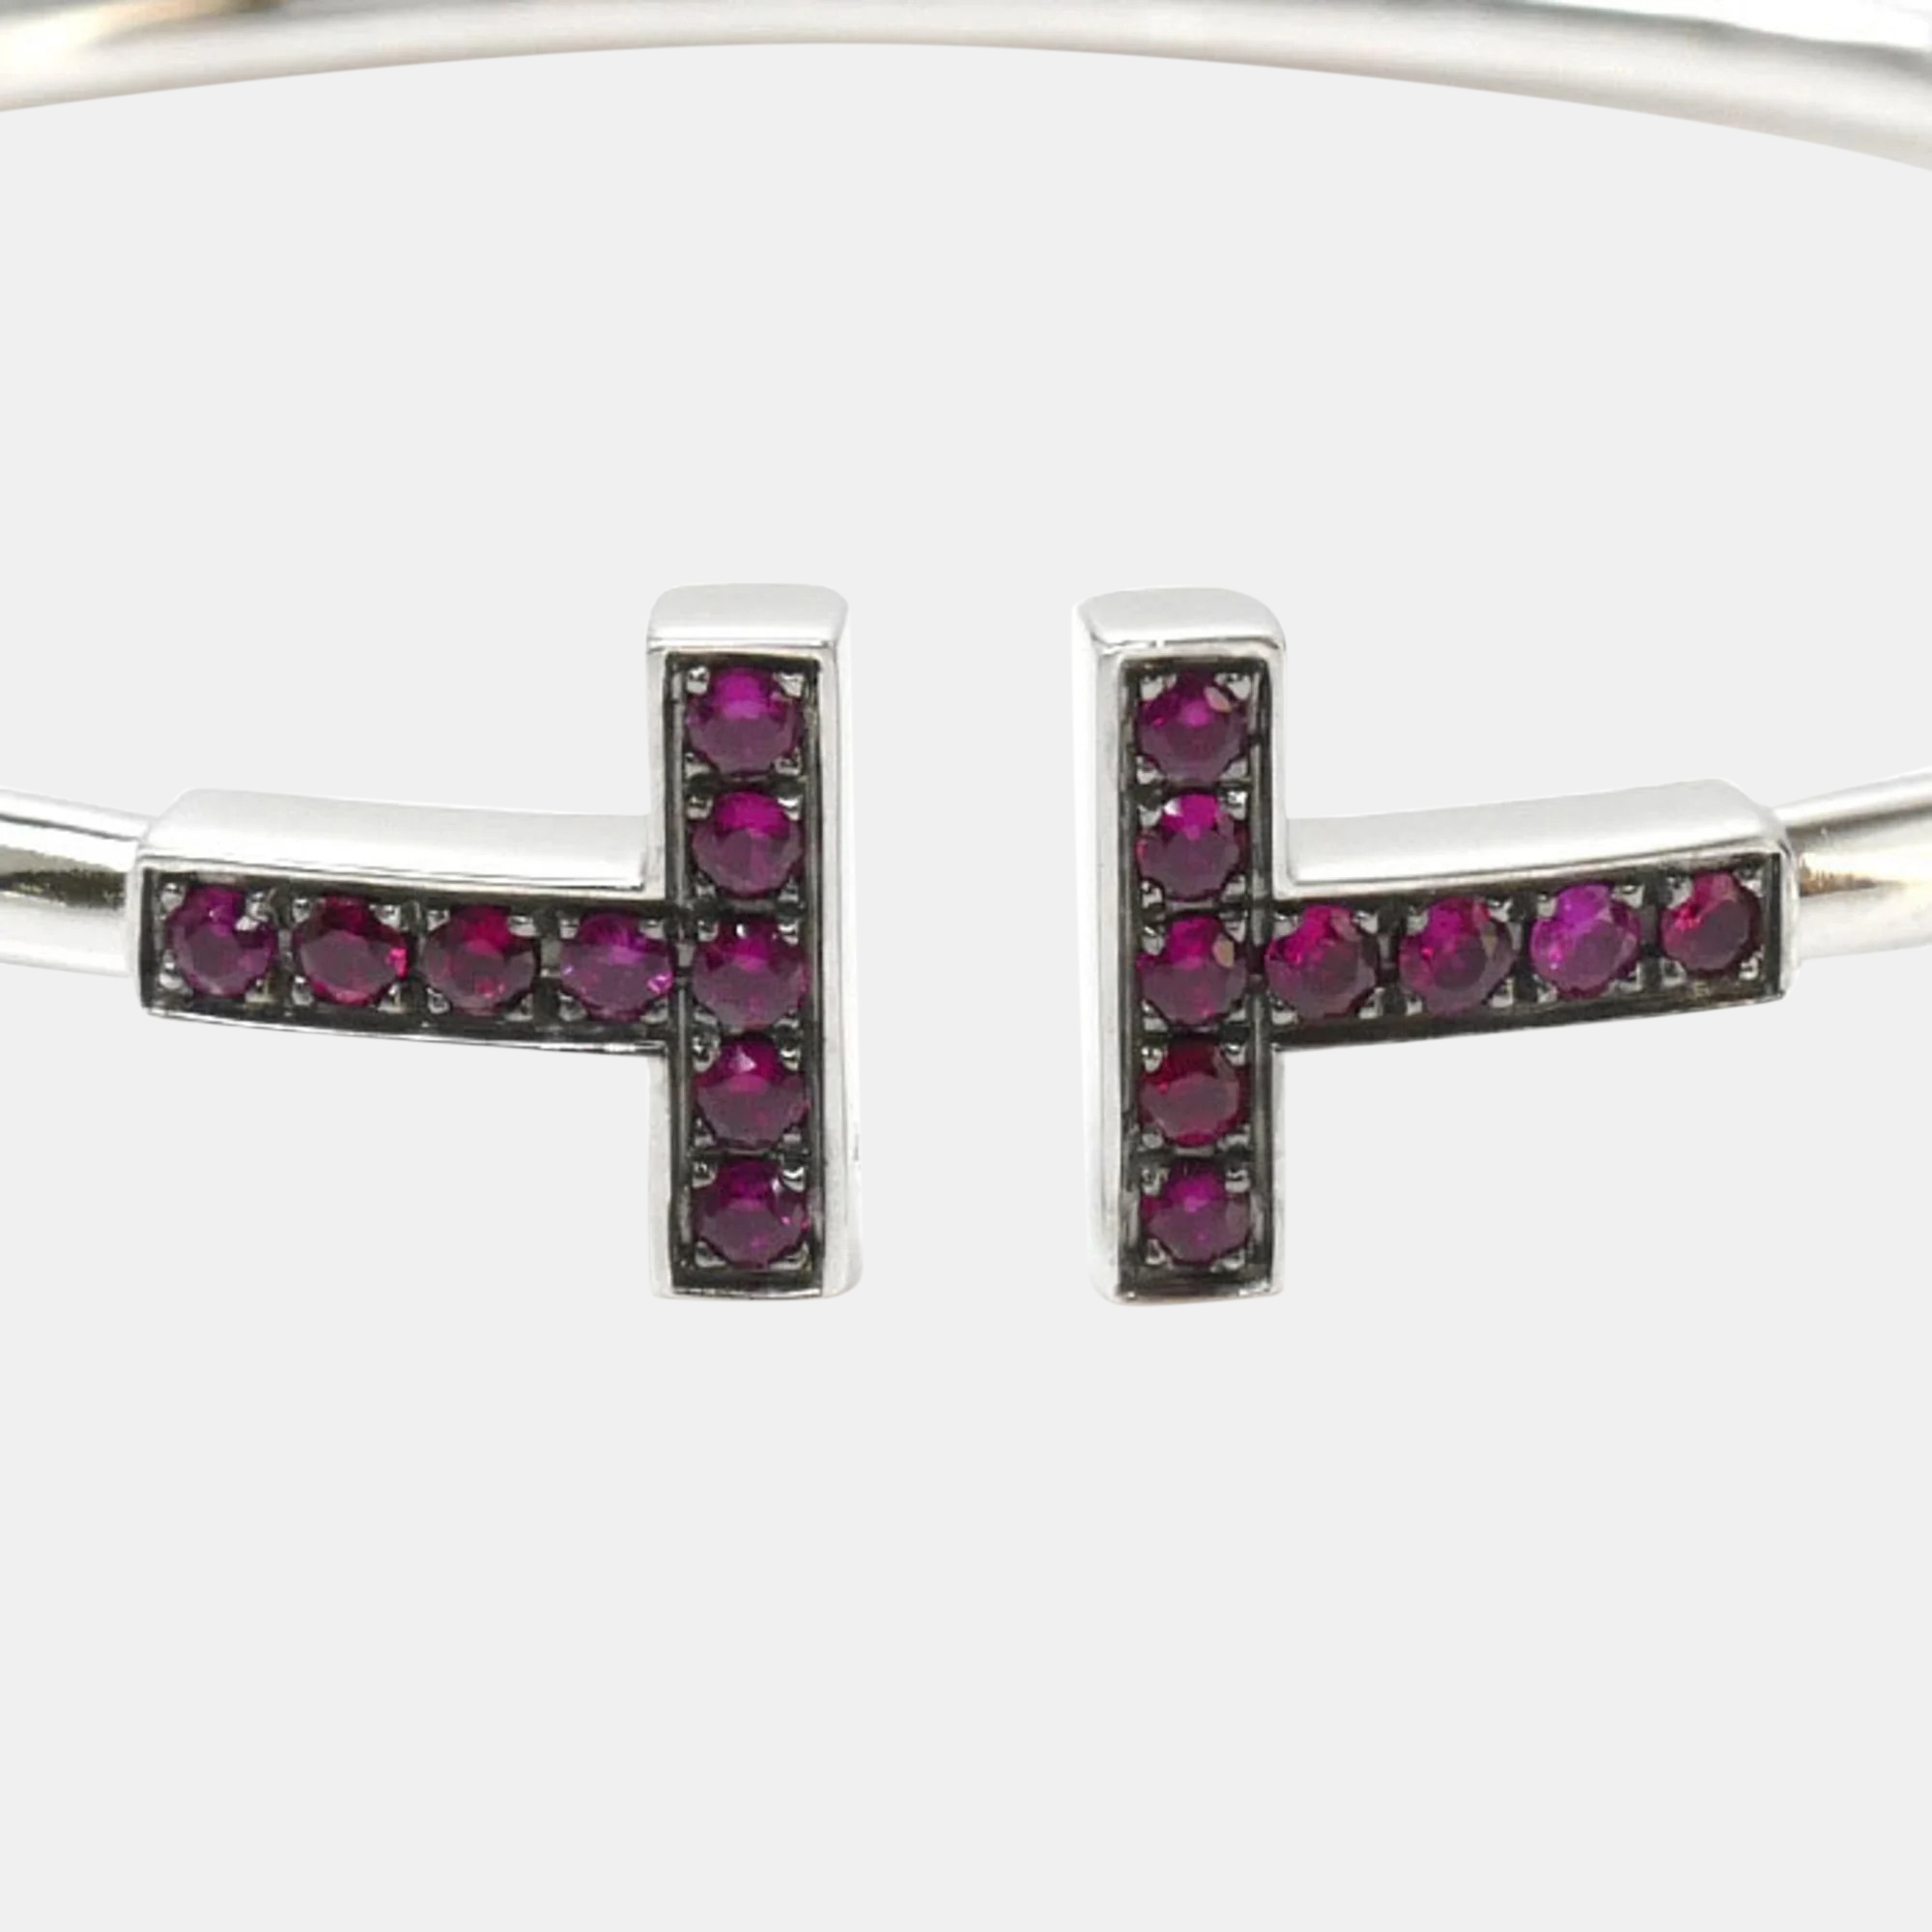 Tiffany & Co. 18K White Gold And Ruby T Wire Bracelet